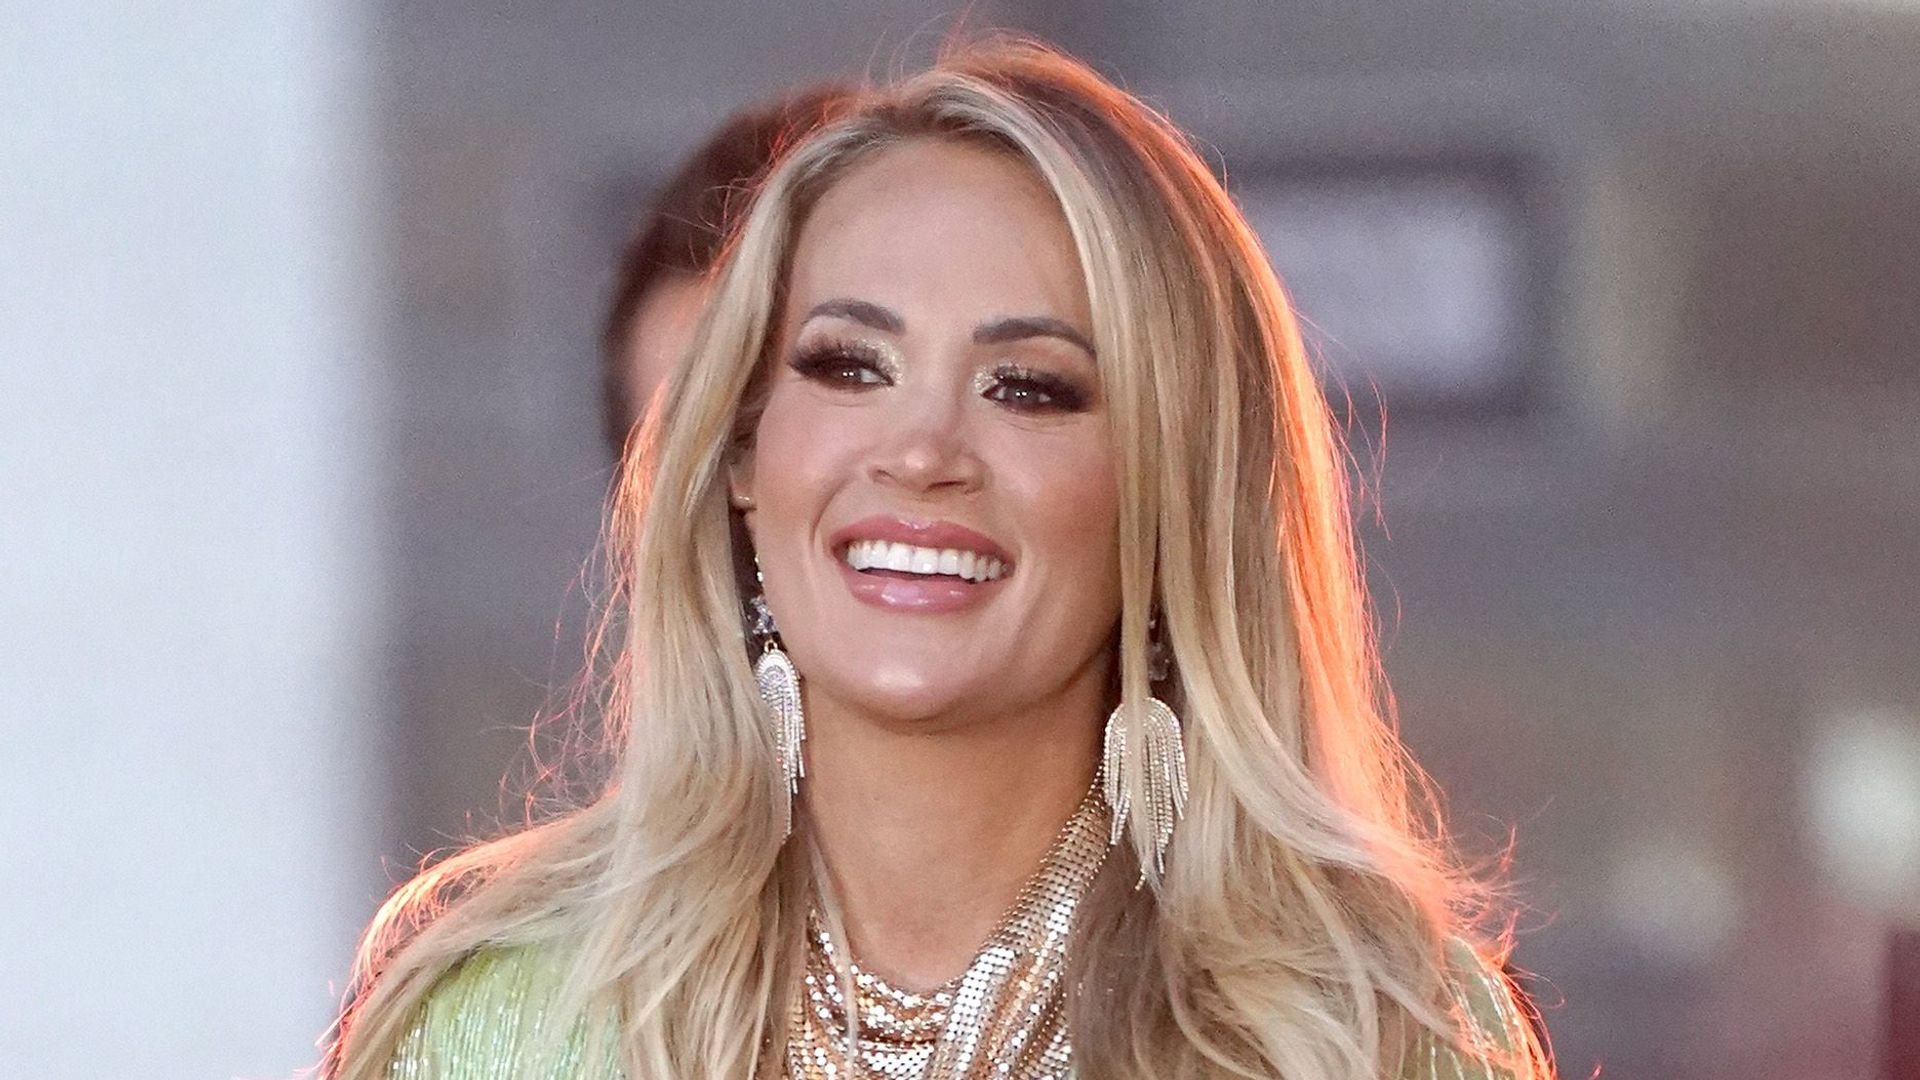 Carrie Underwood in a sparkly green dress